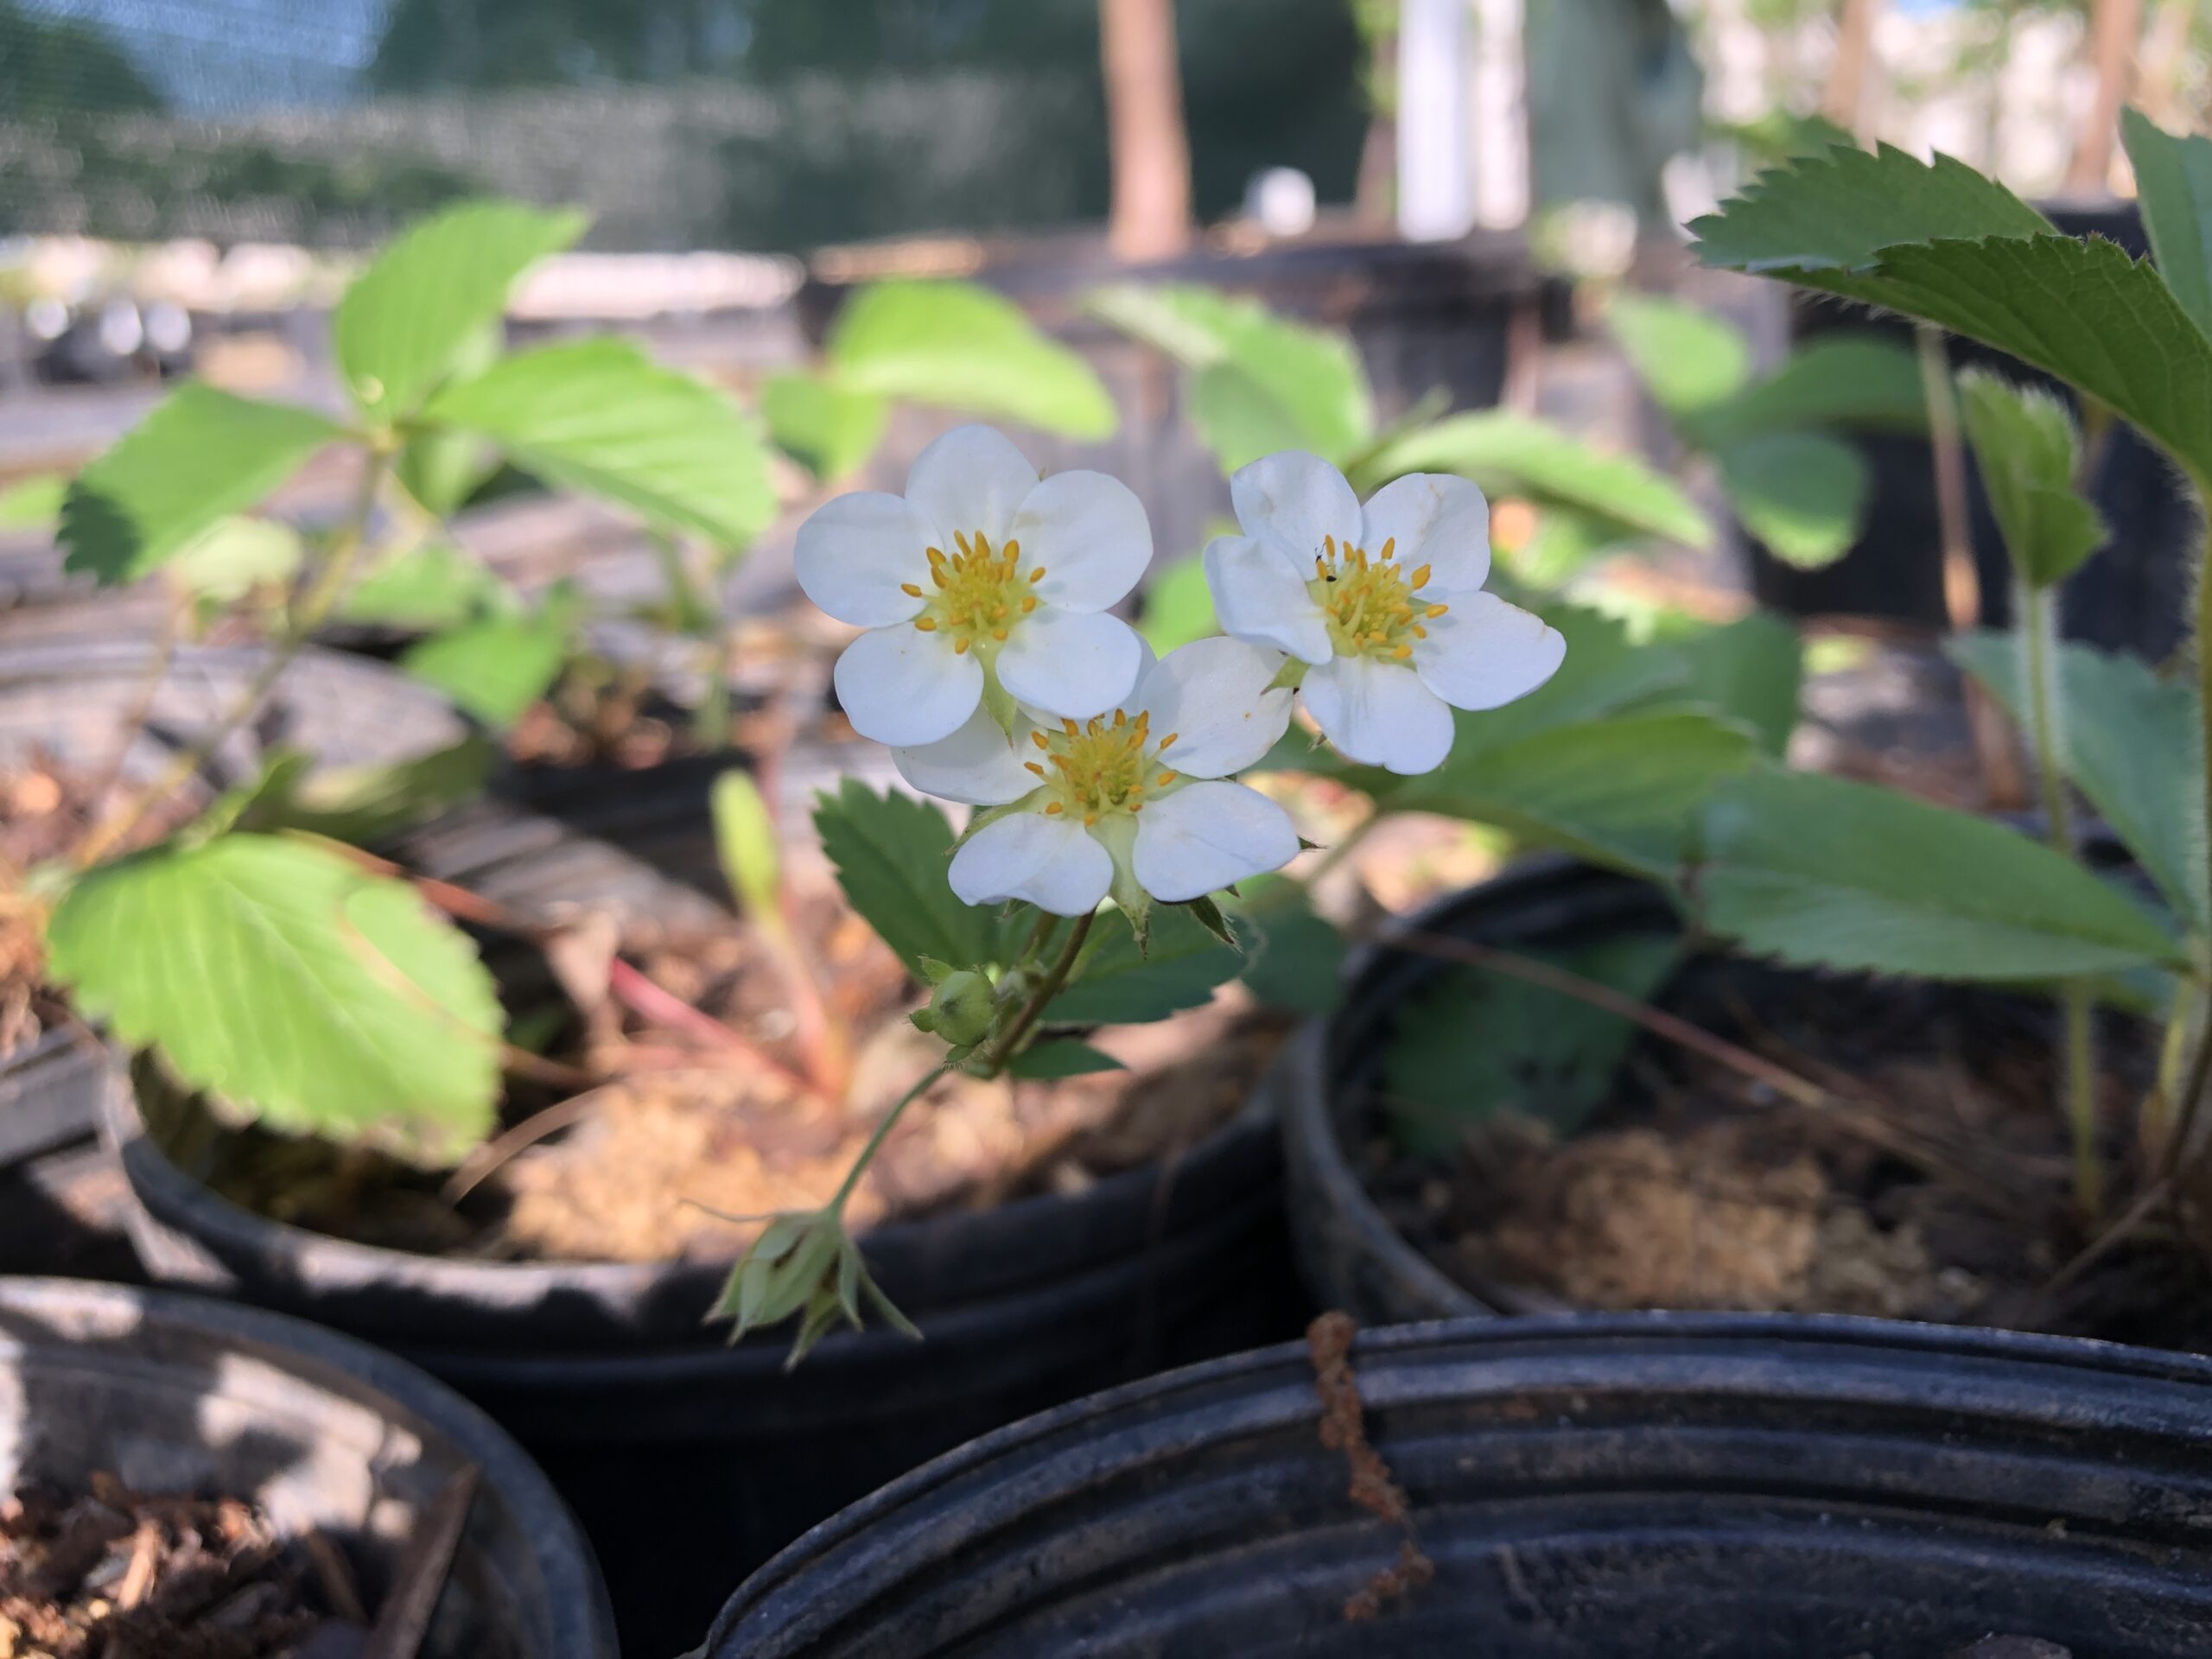 3 white flowers of Fragaria virginiana (Wild Strawberry) in front of a blurred background of green leaves and black plastic pots